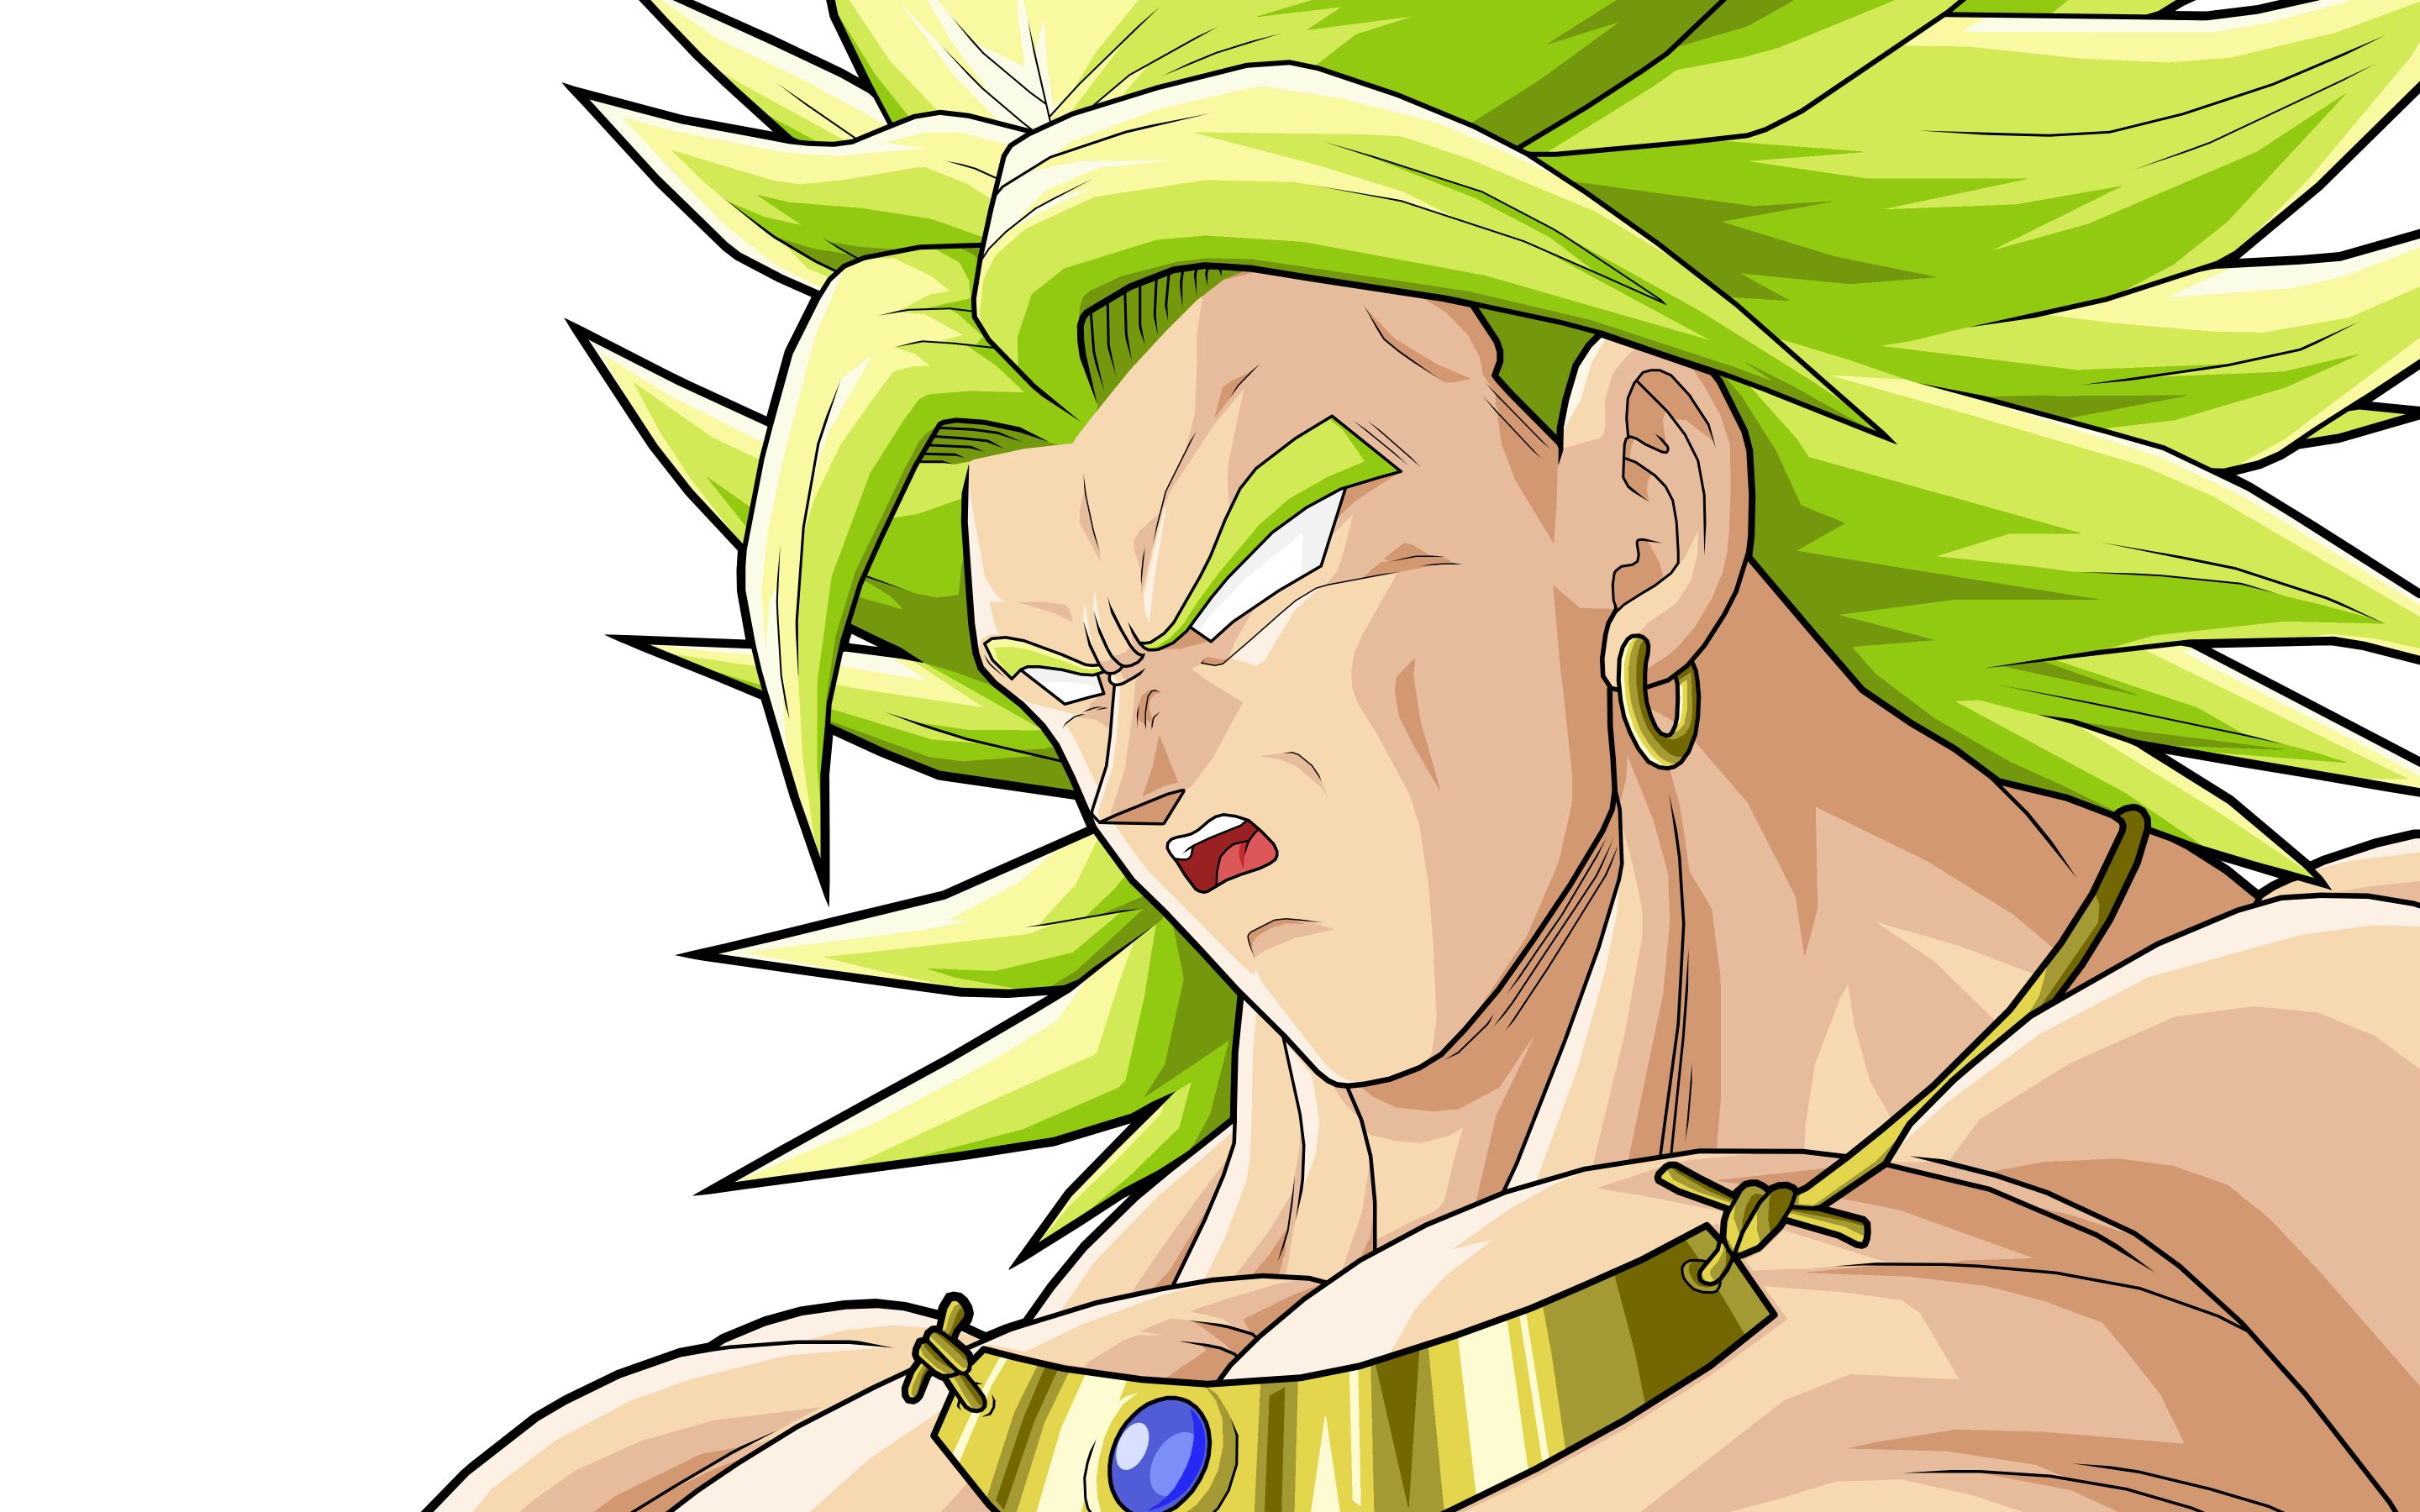  Broly (Dragon Ball) HQ Background Images